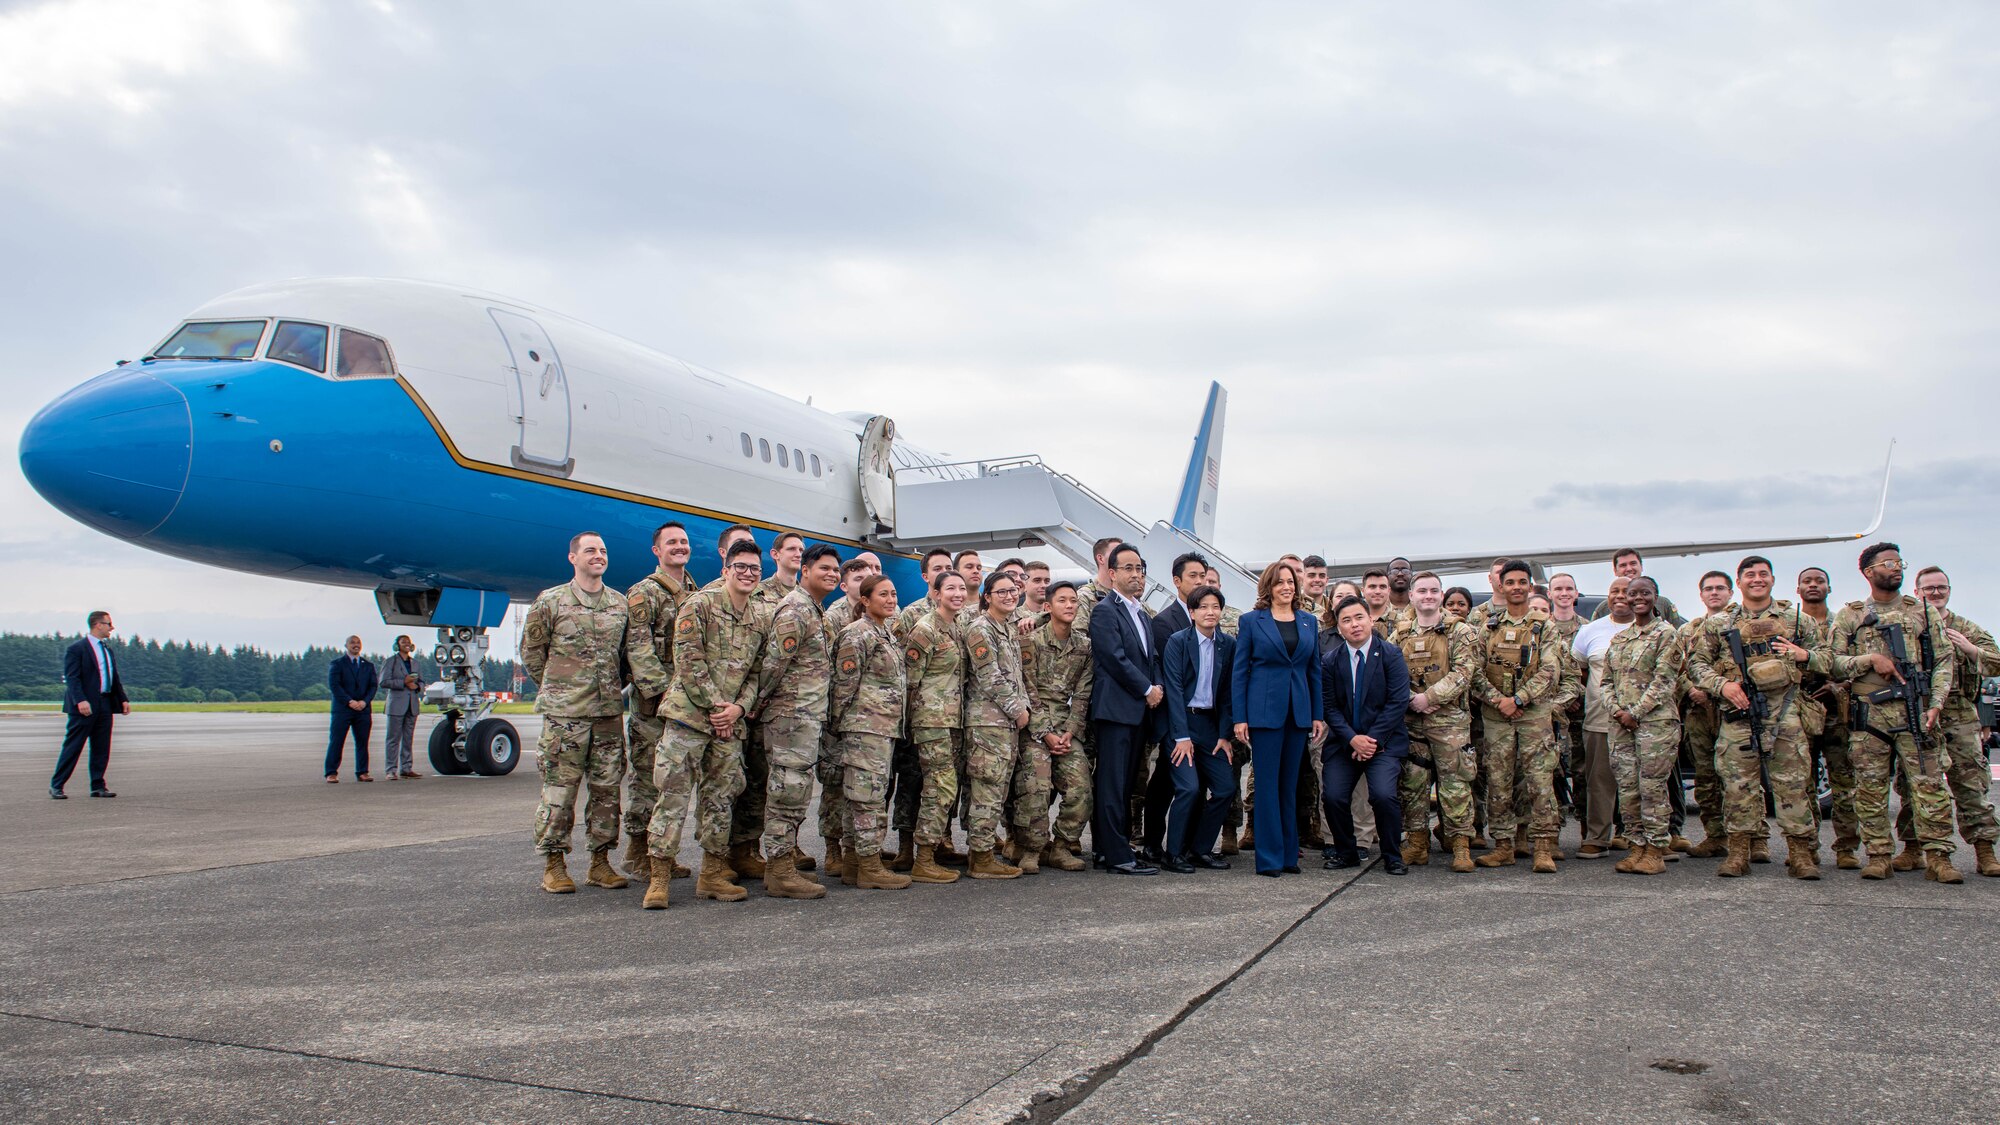 Vice President Harris poses for a group photo with troops